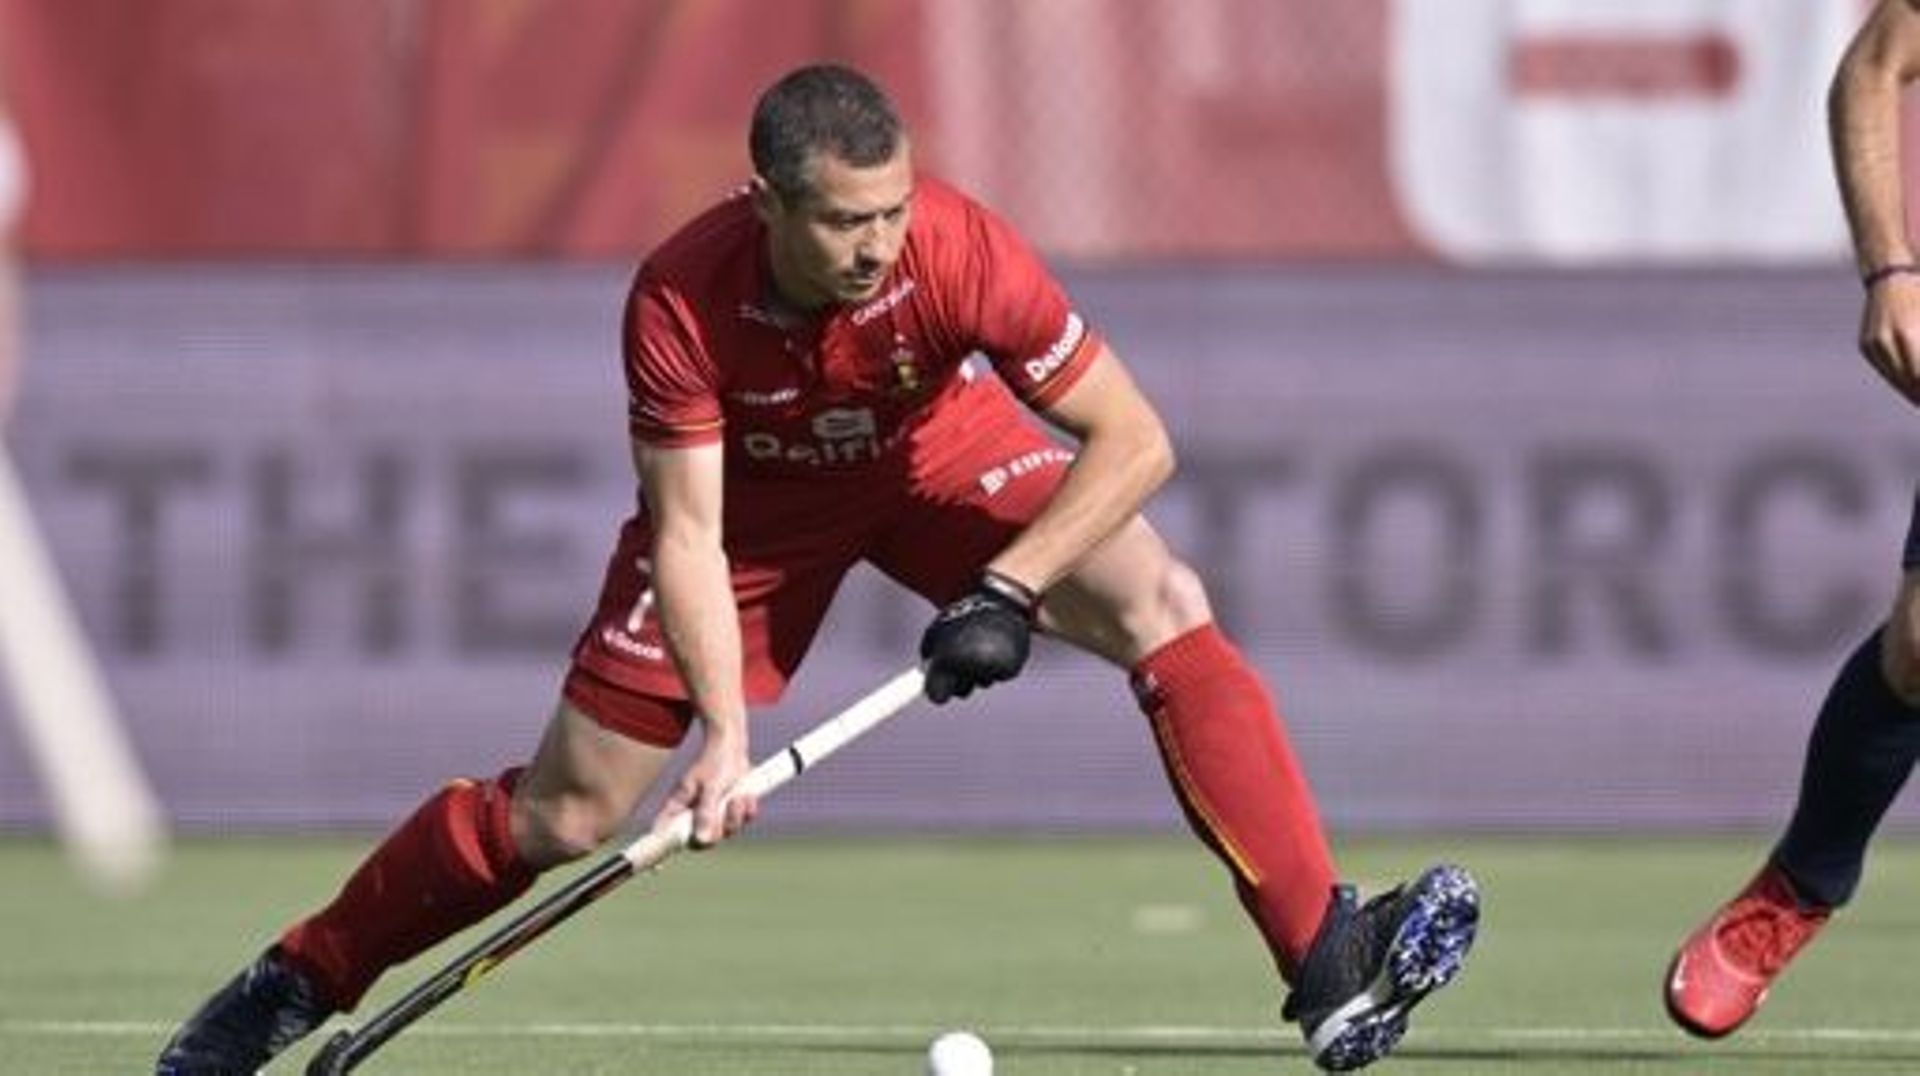 Belgium's John-John Dohmen pictured in action during a hockey match between the Belgian Red Lions and France in the group stage (game 9 out of 16) of the Men's FIH Pro League competition, Saturday 28 May 2022 in Wilrijk, Antwerp. BELGA PHOTO JOHAN EYCKENS